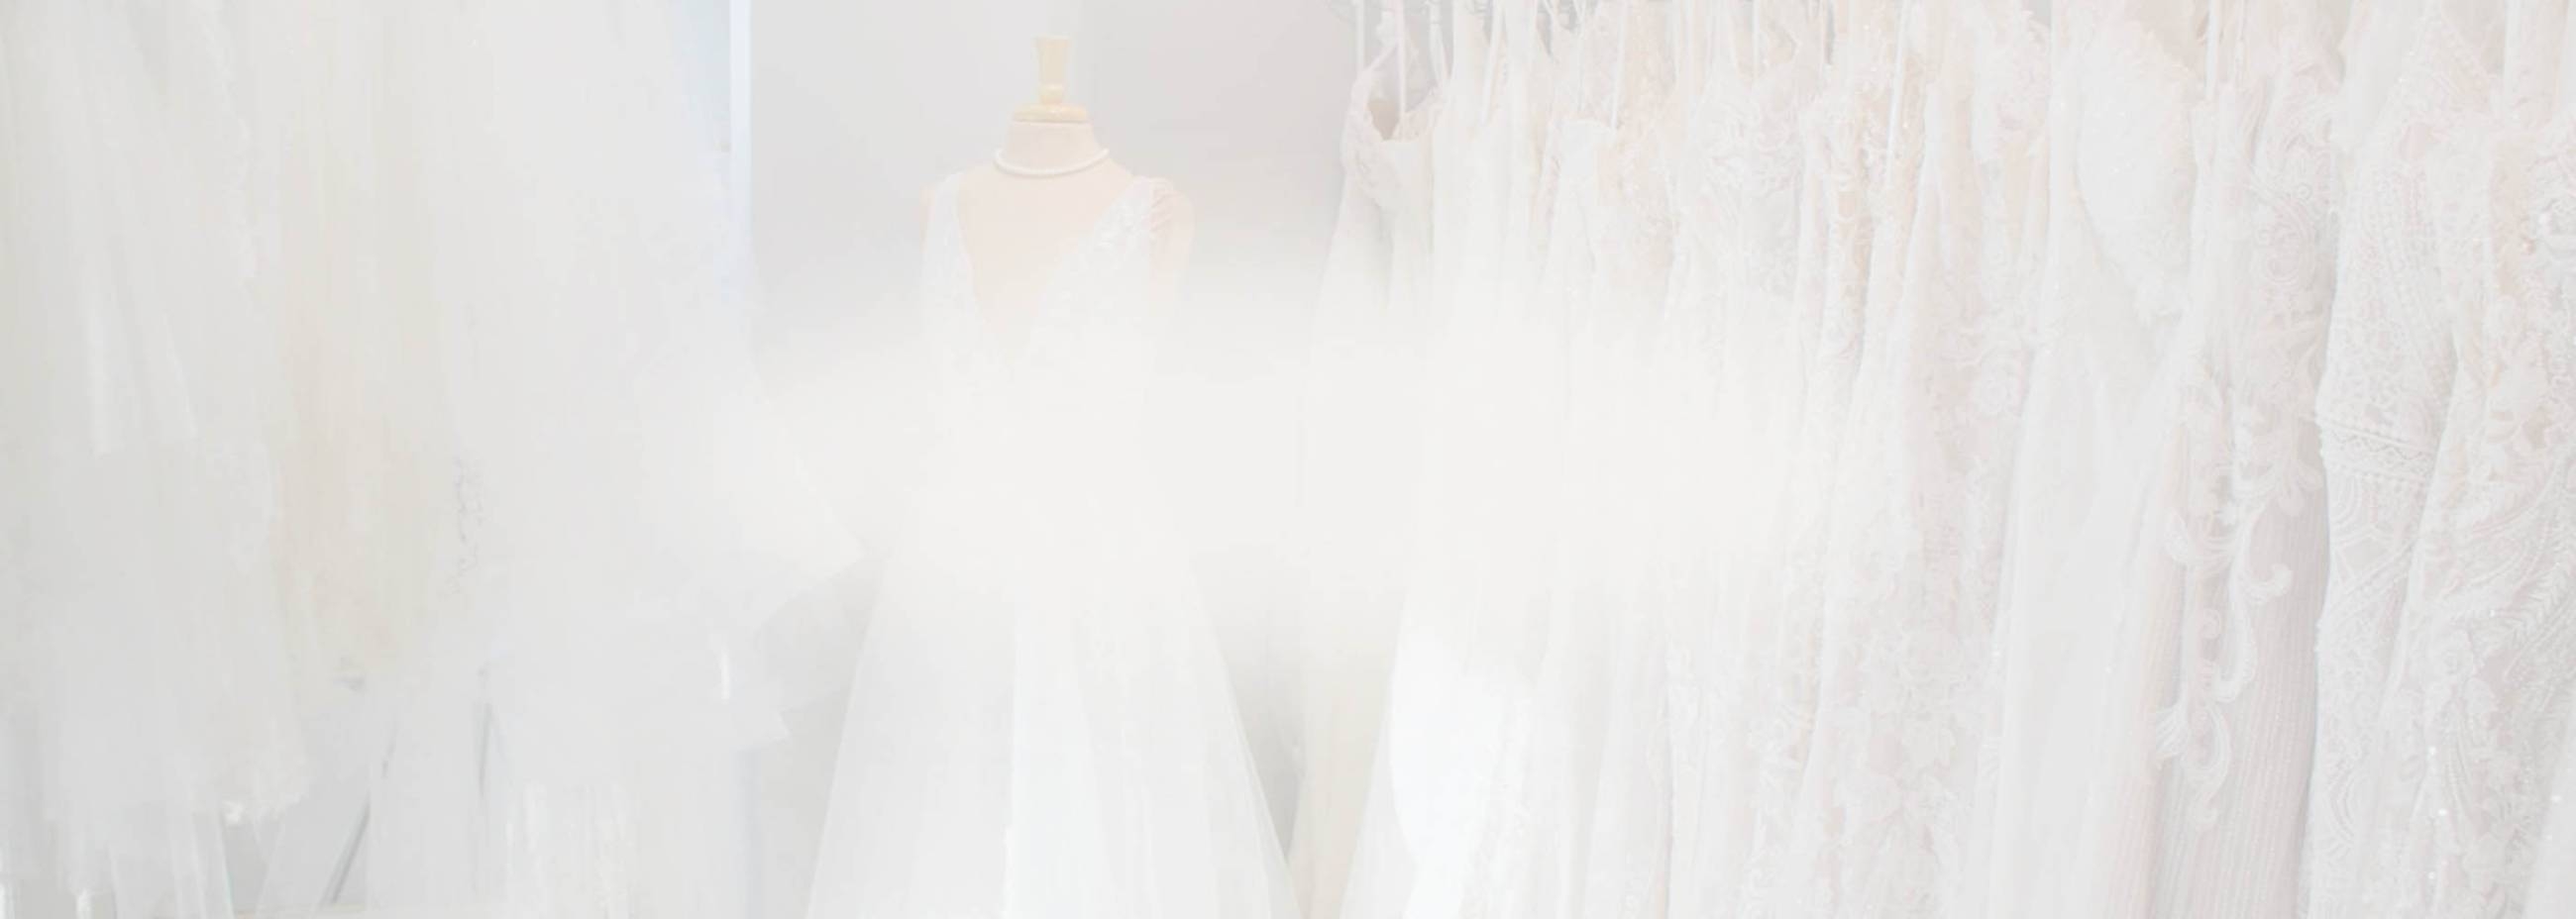 Photo of the bridal gowns - Desktop Image